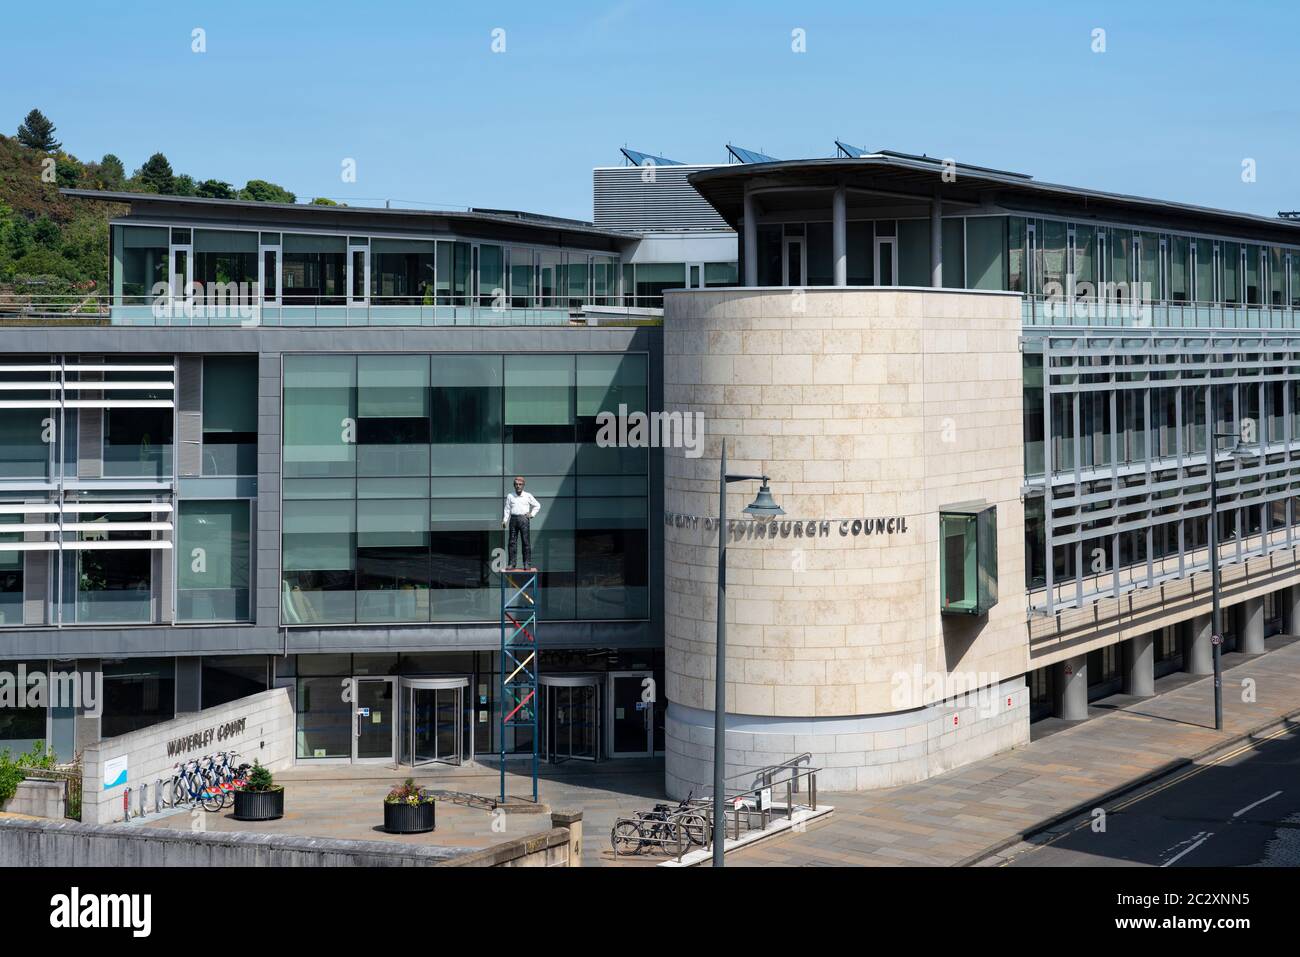 Exterior view of Waverley Court and offices of Edinburgh City Council, Scotland, UK Stock Photo